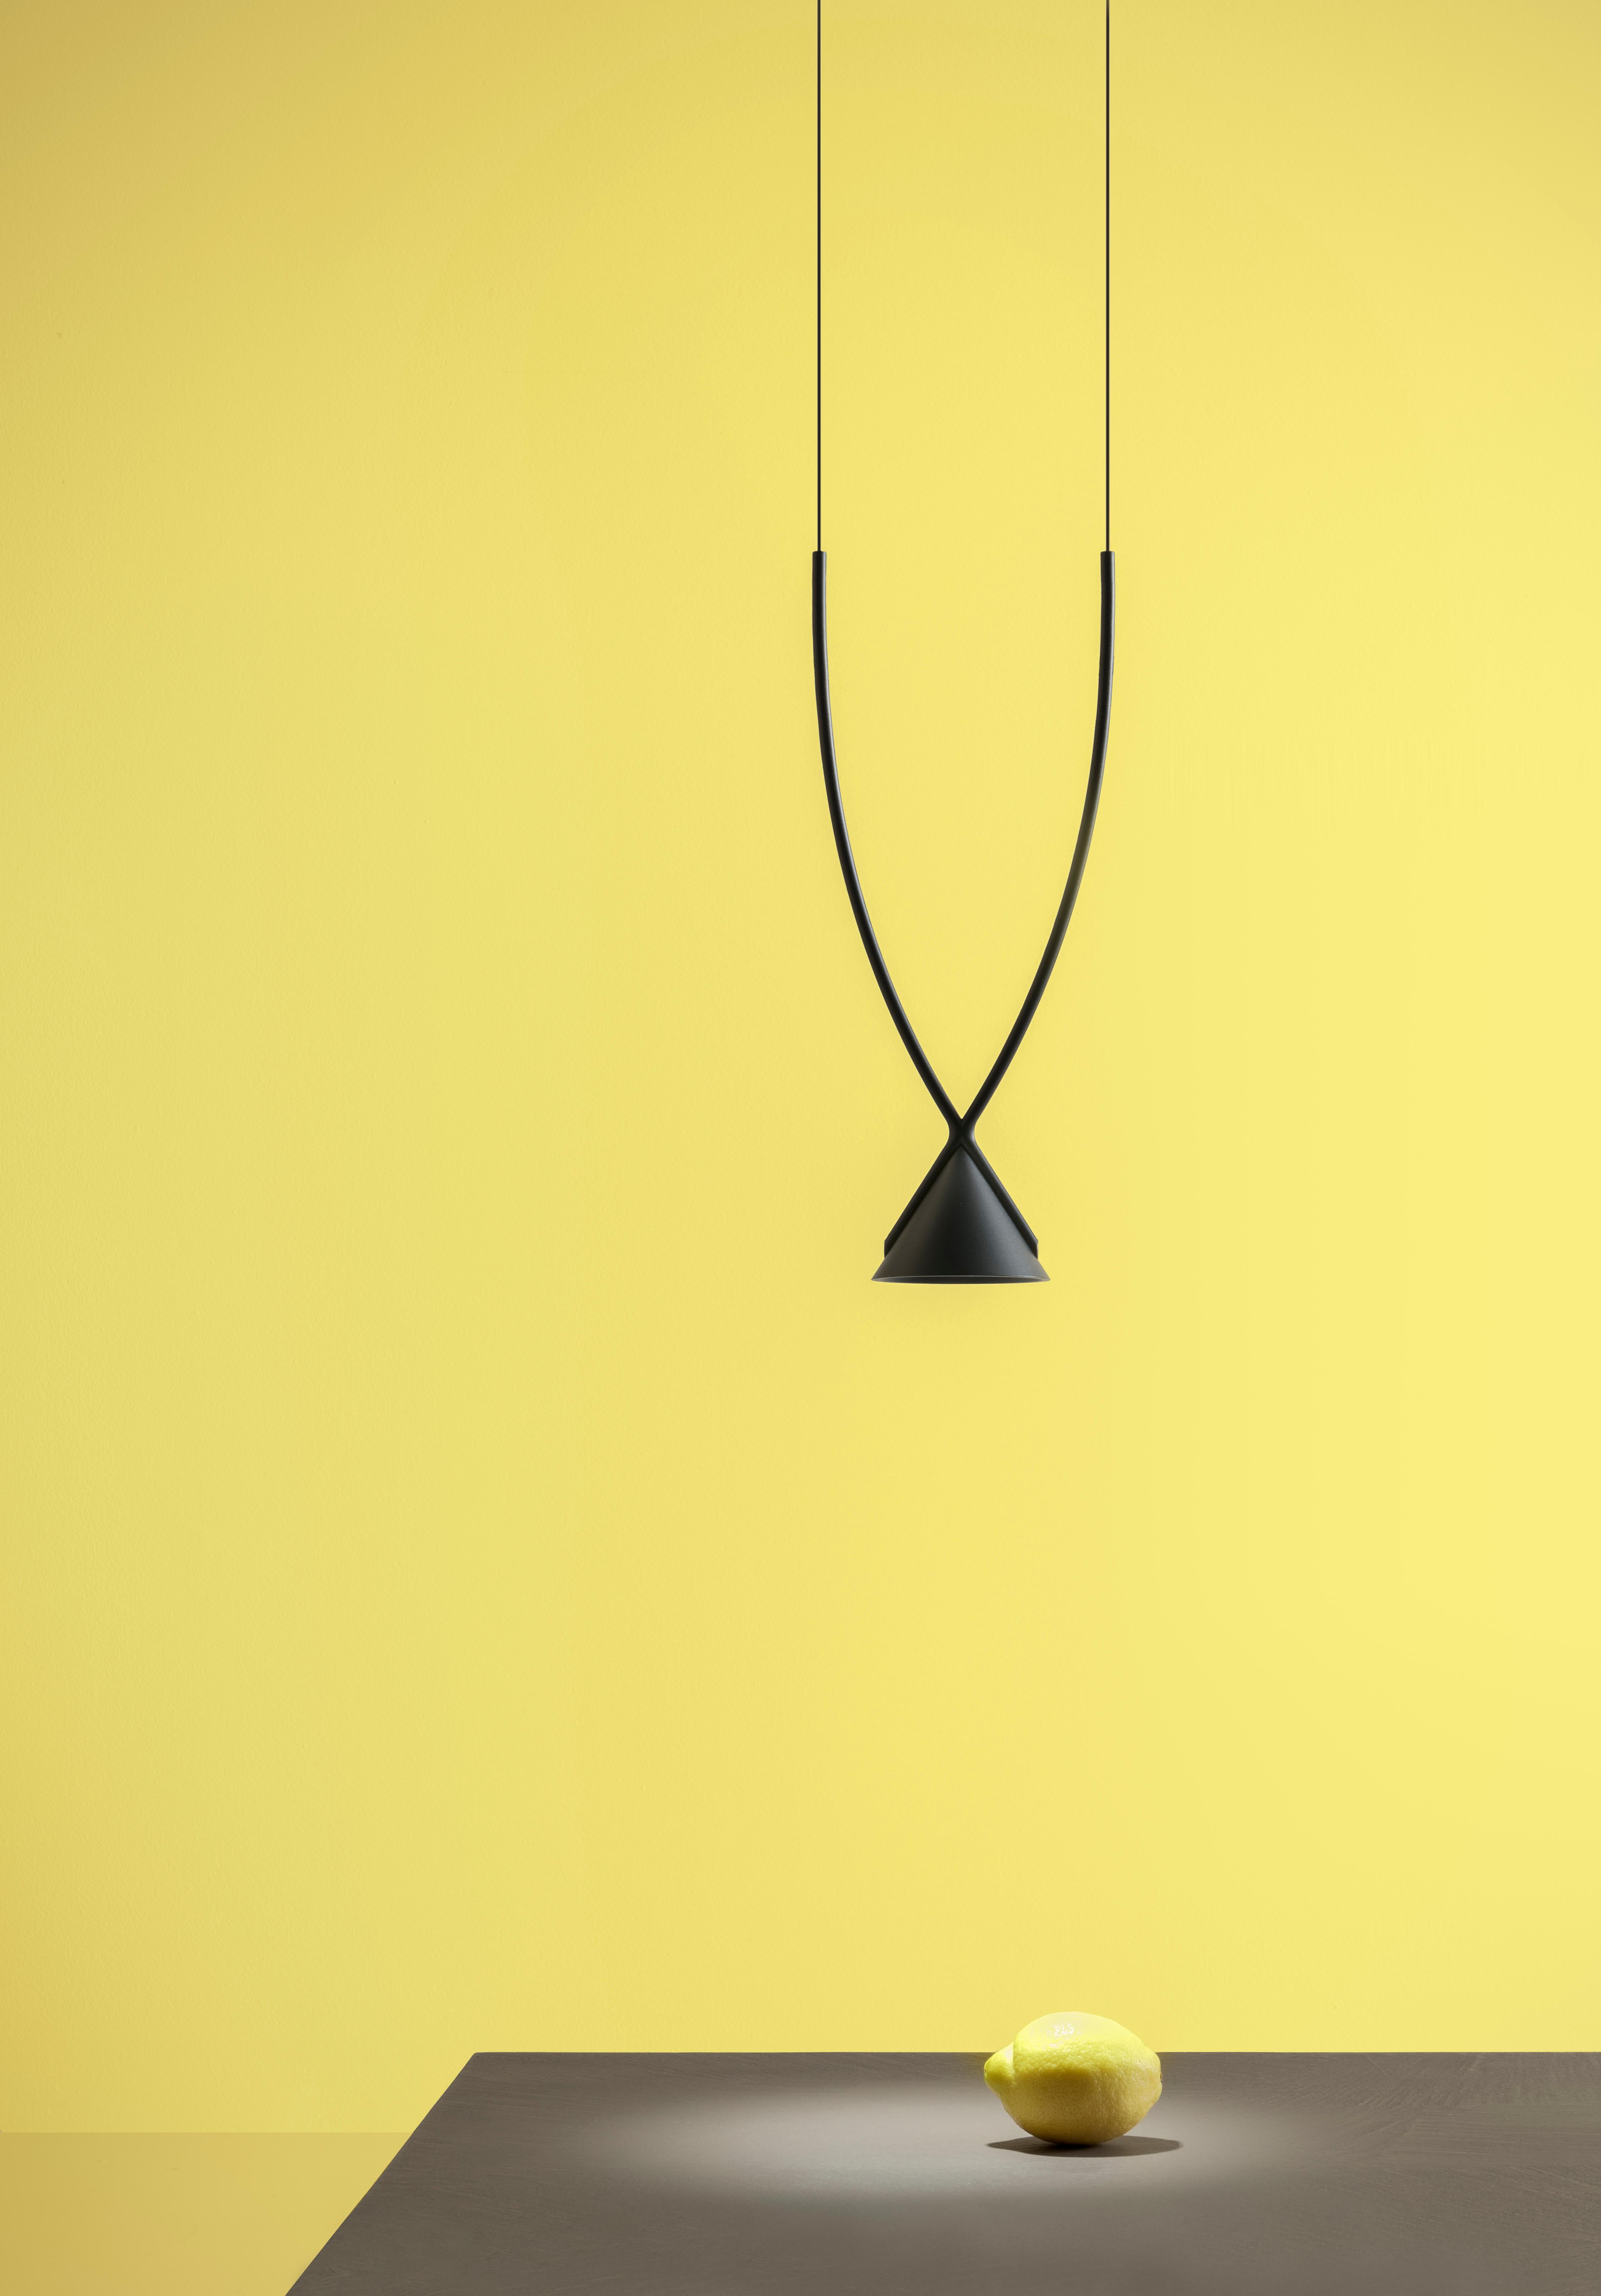 Axolight Jewel Small Pendant Lamp in Black with Black Finish by Yonoh

Synthesizing is the gift of knowing how to transmit complex things in a simple way. Jewel mono summarizes: minimalism in design and high lighting performance, aesthetic elegance